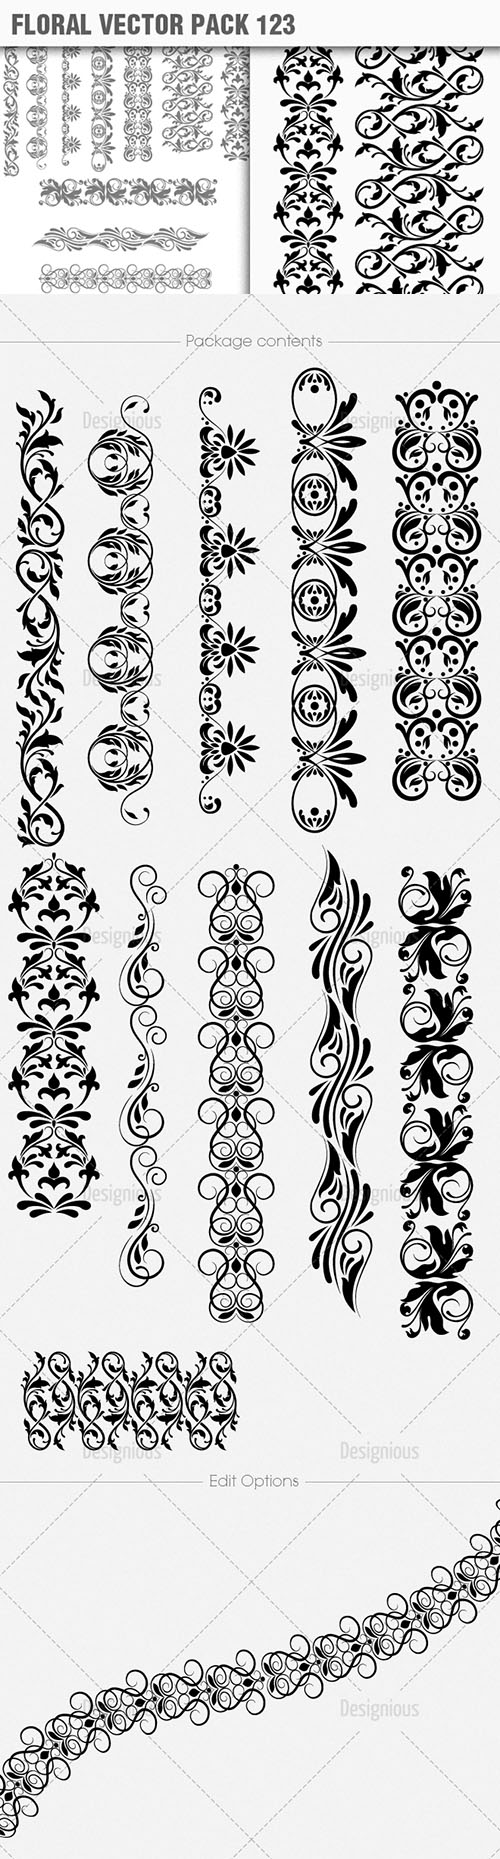 Floral Vector Pack 123